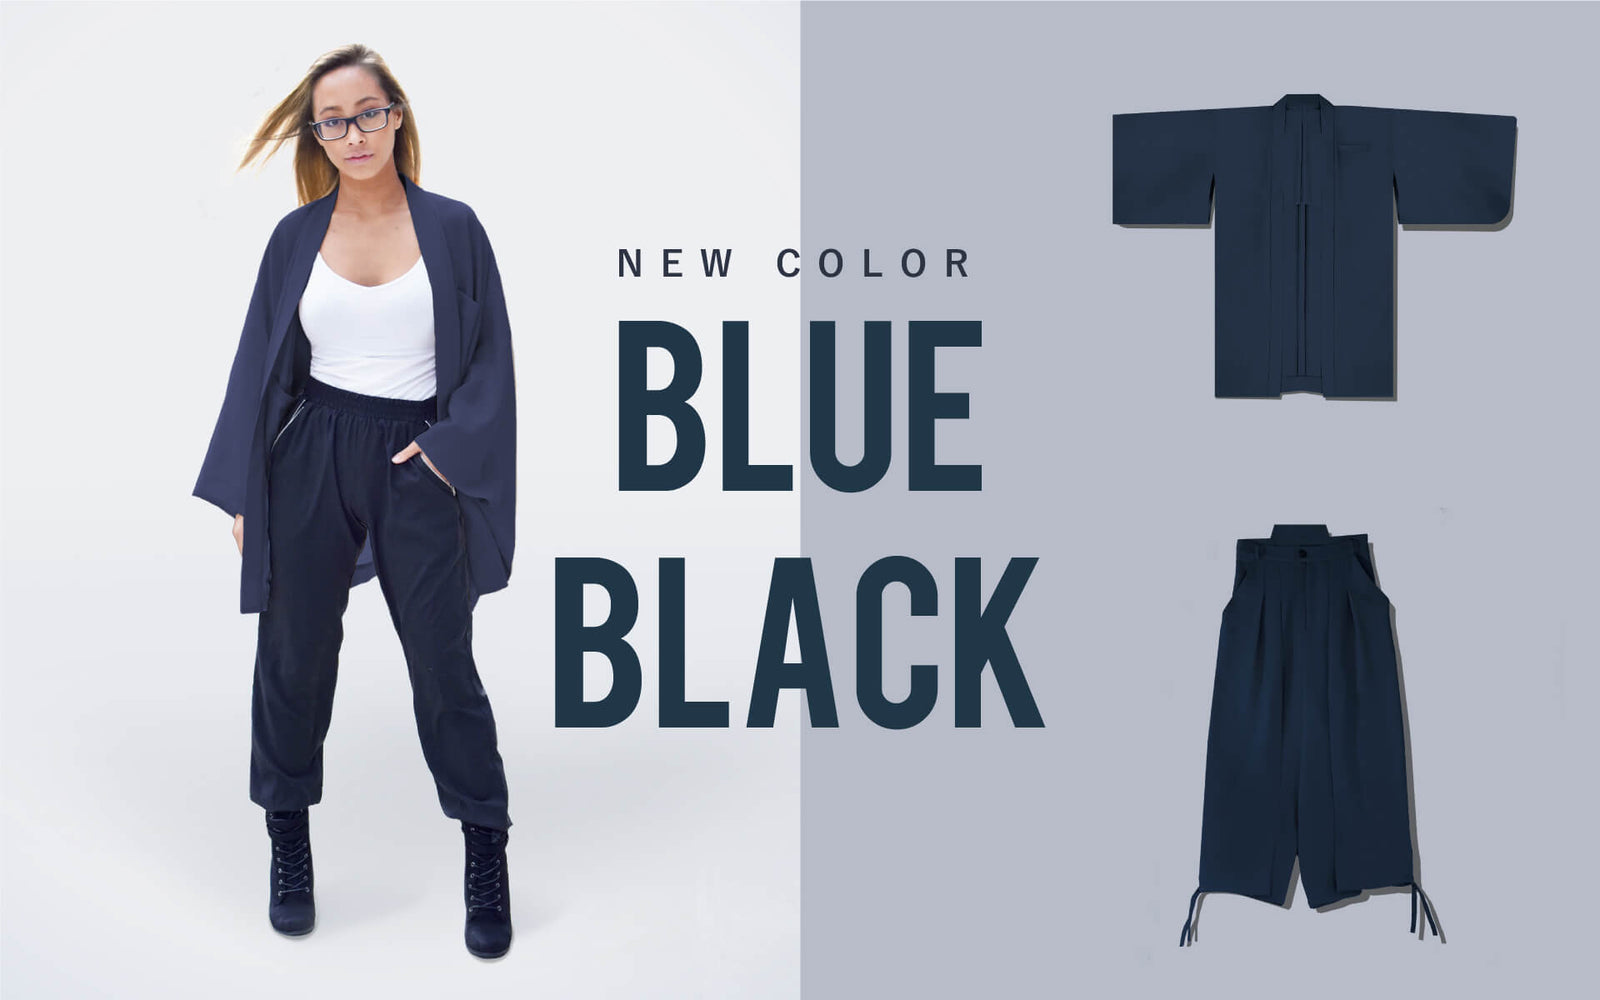 New color Blue black is available for Samurai Mode Jacket and Pants